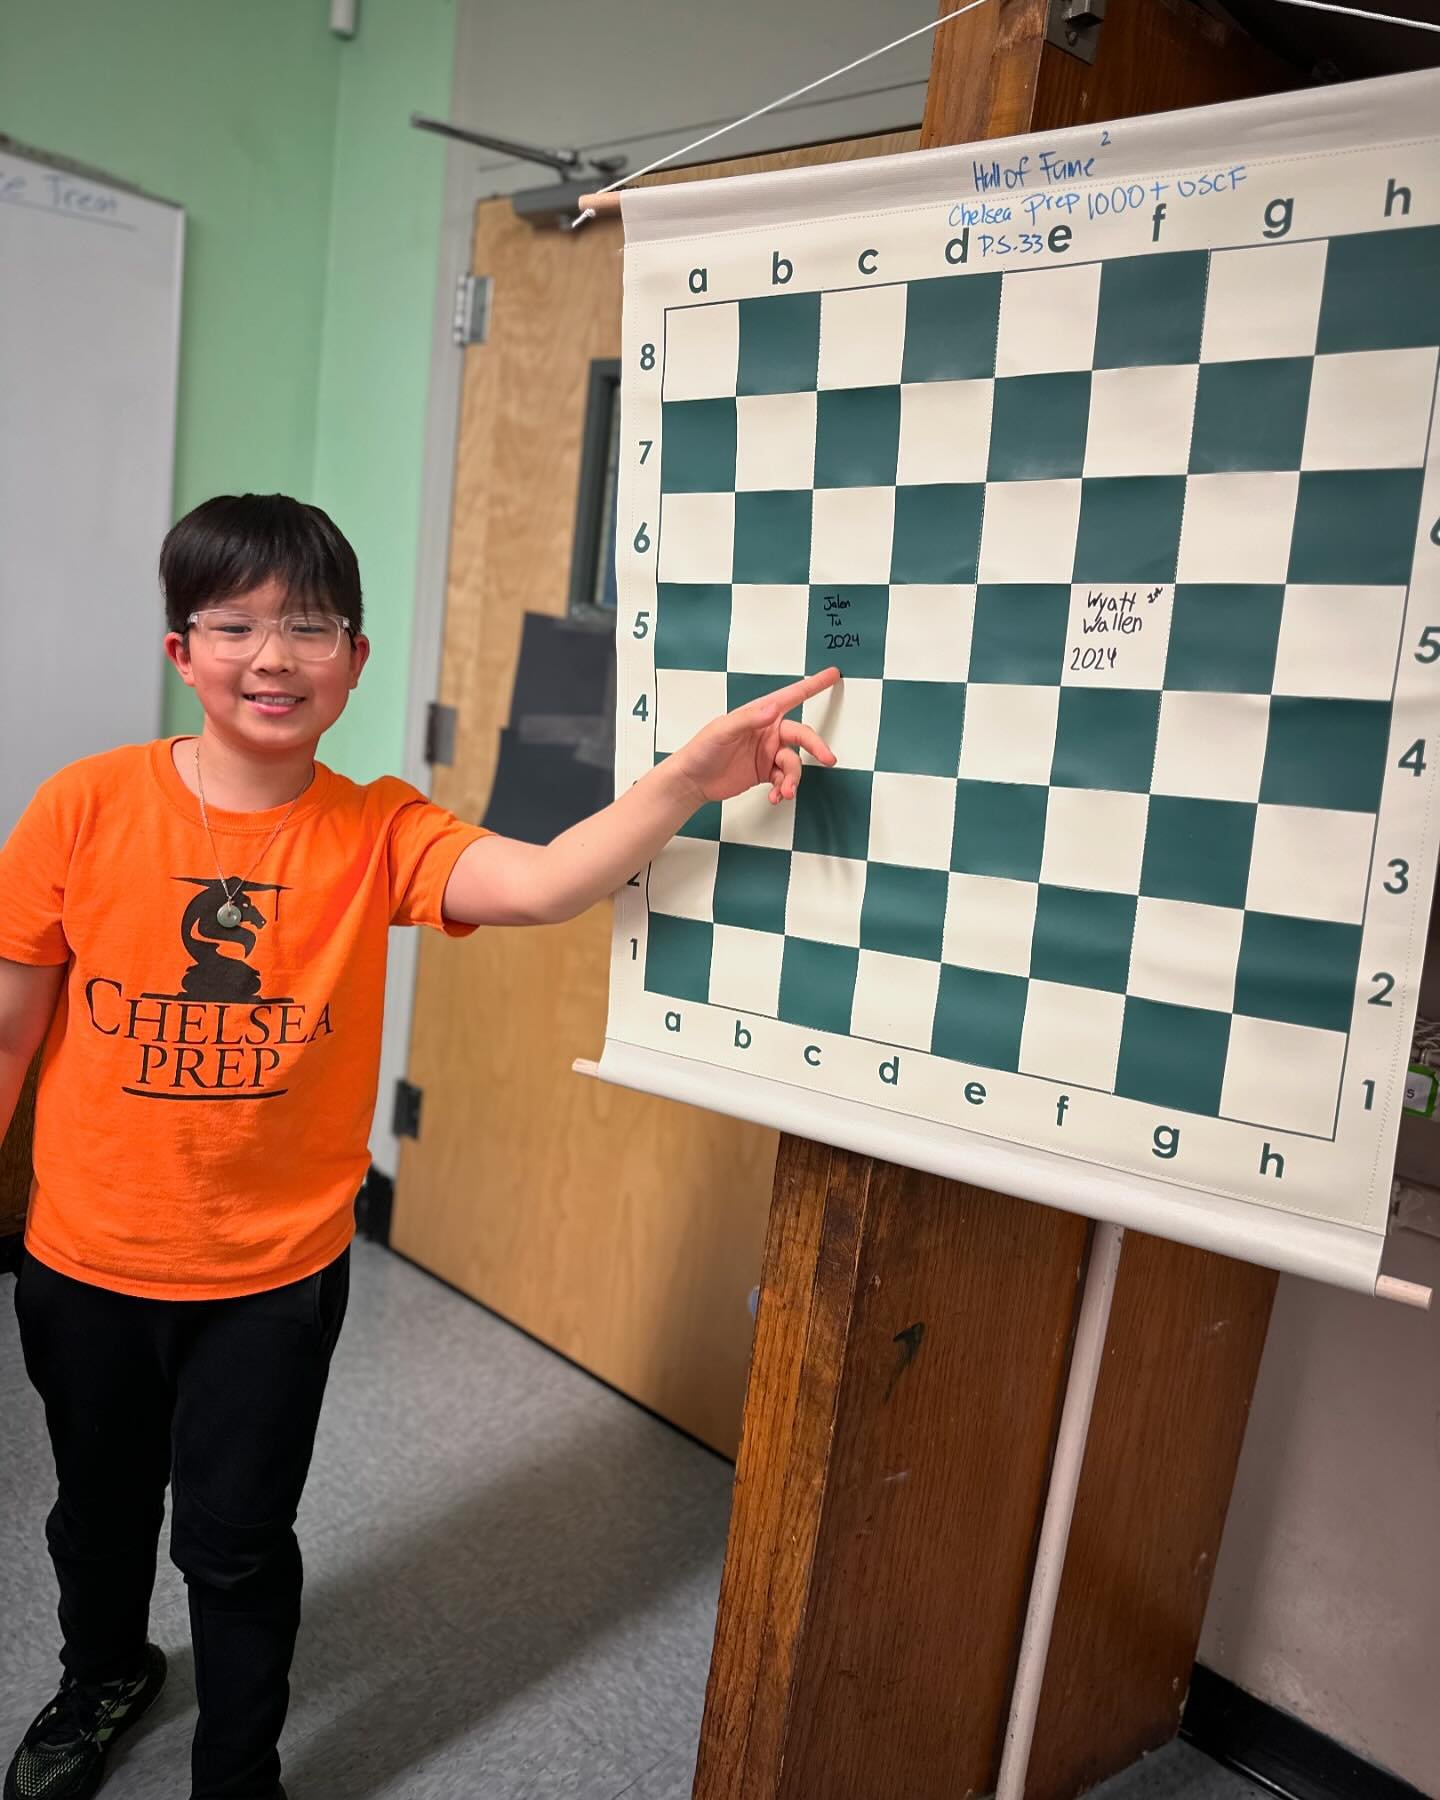 Join us in celebrating Jalen breaking 1000! He is the 66th player to join Chelsea Preps hall of fame. #ps33chess #chelseaprepchess #1000plususcf #legendsoftomorrow